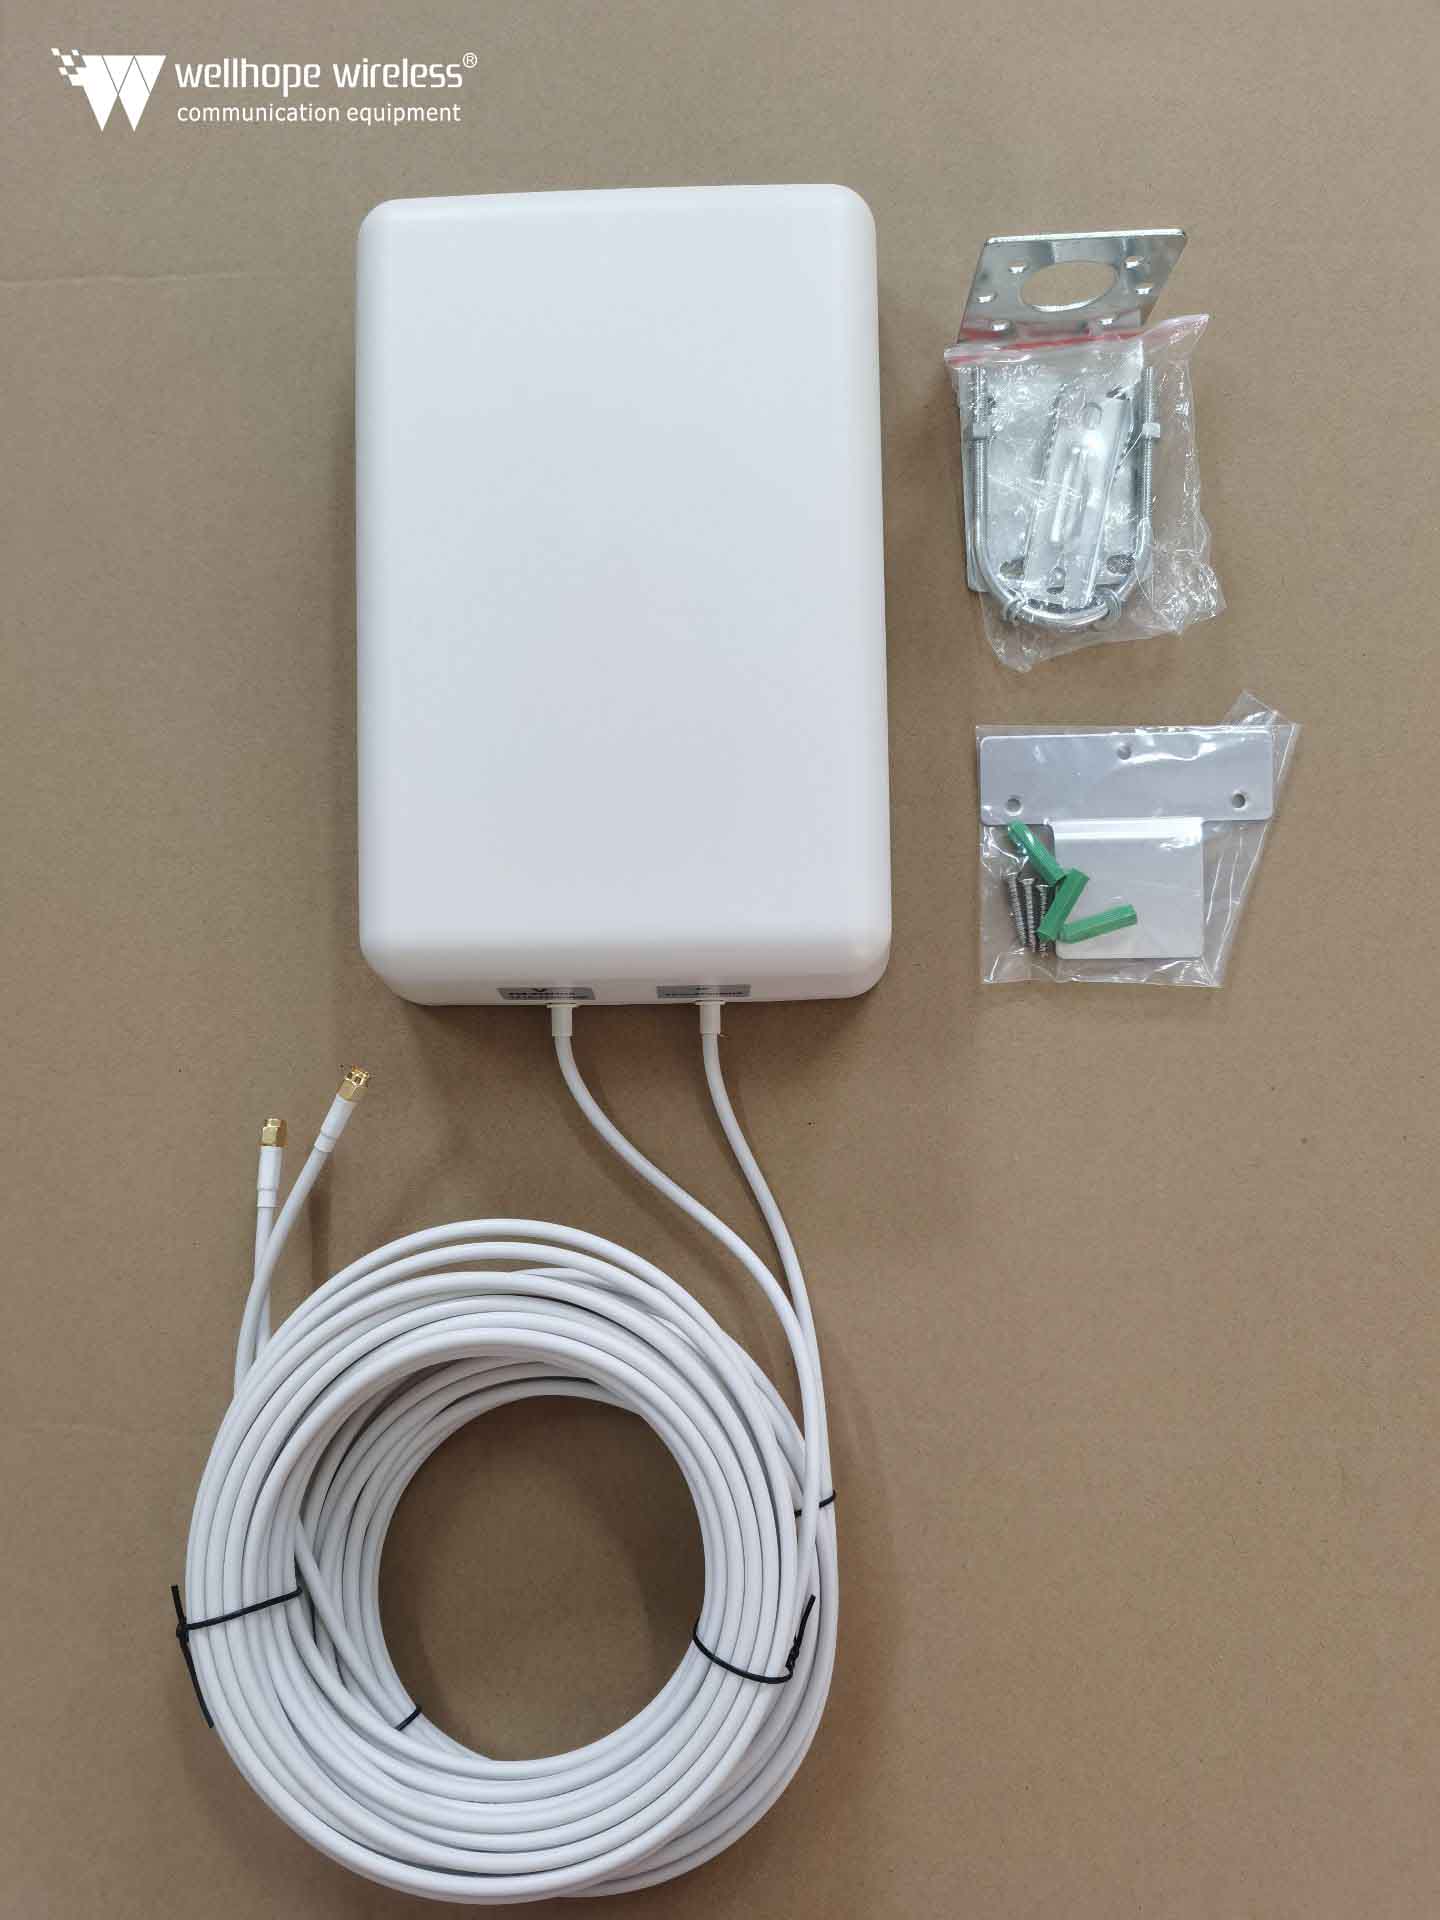 2020-12-30 4G megnet 1k and 100pcs 4G mimo patch antenna on ship